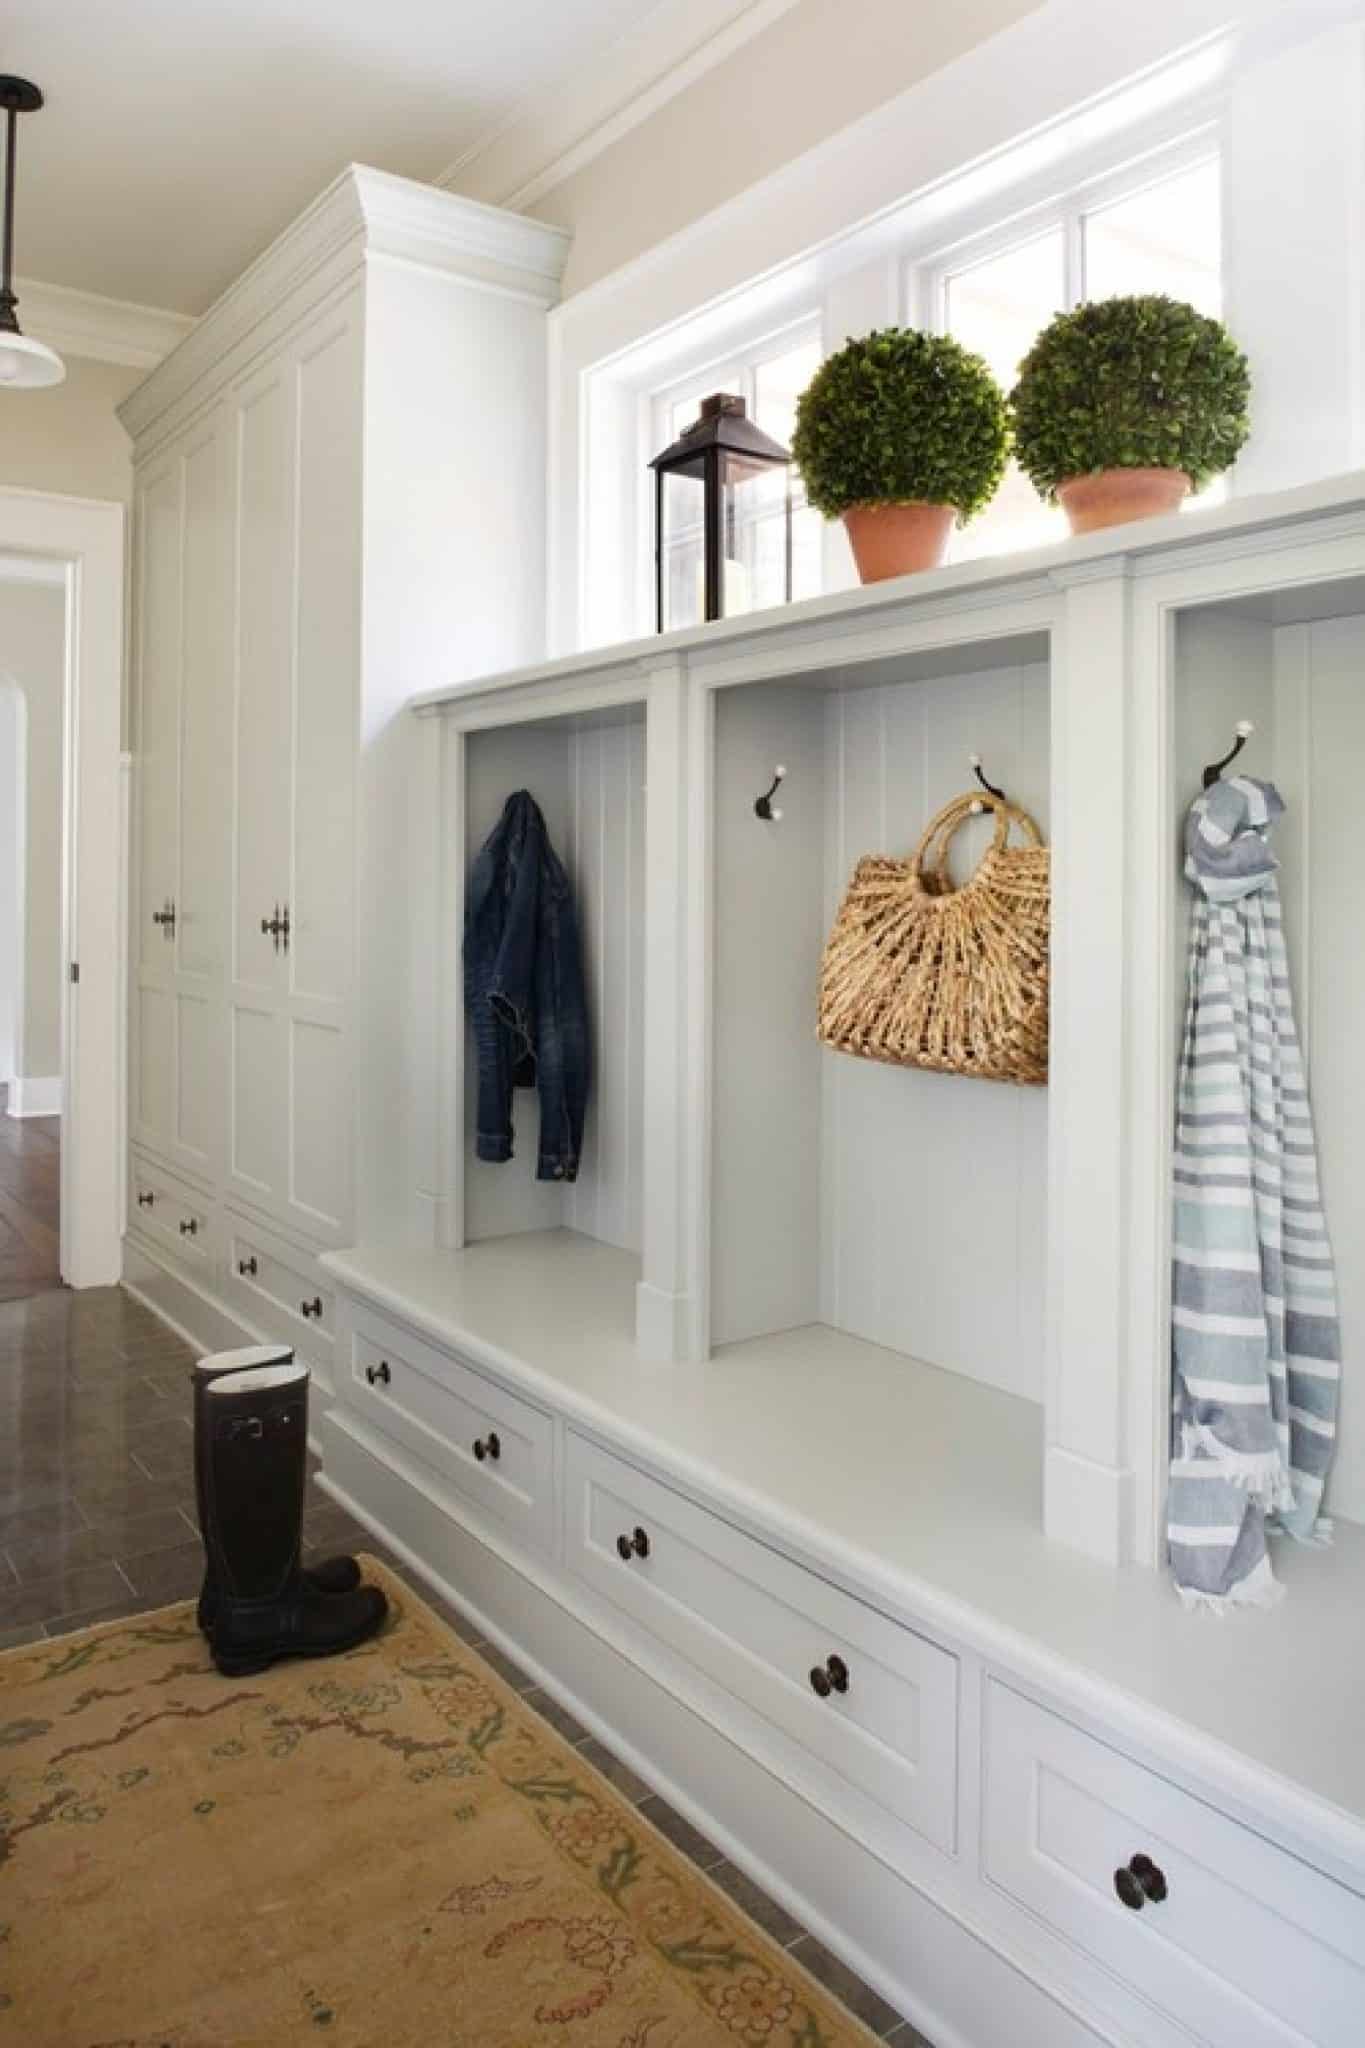 152 Mudroom Ideas & Pictures: Enhance The Entry To The House